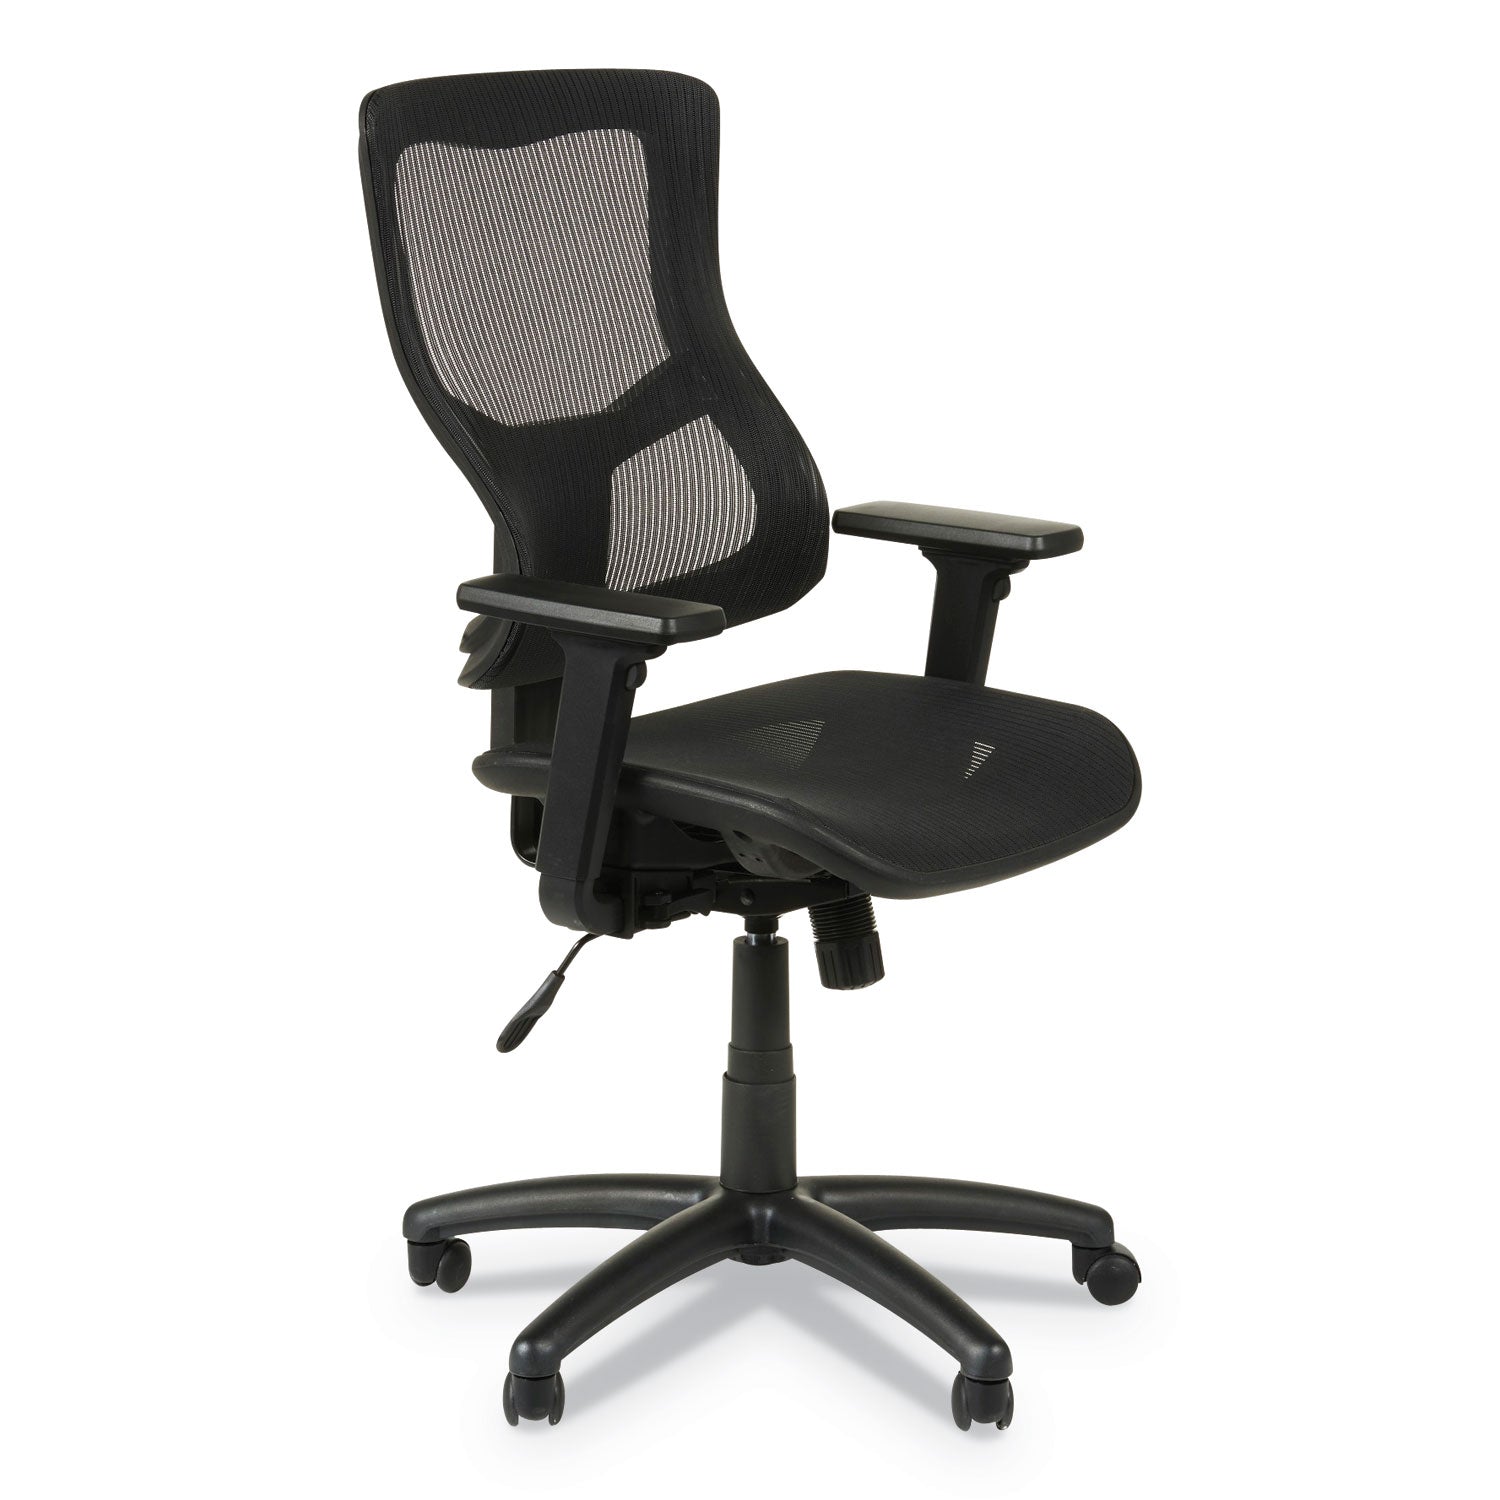 alera-elusion-ii-series-suspension-mesh-mid-back-synchro-seat-slide-chair-supports-275-lb-1634-to-2035-seat-black_aleelt4218s - 1